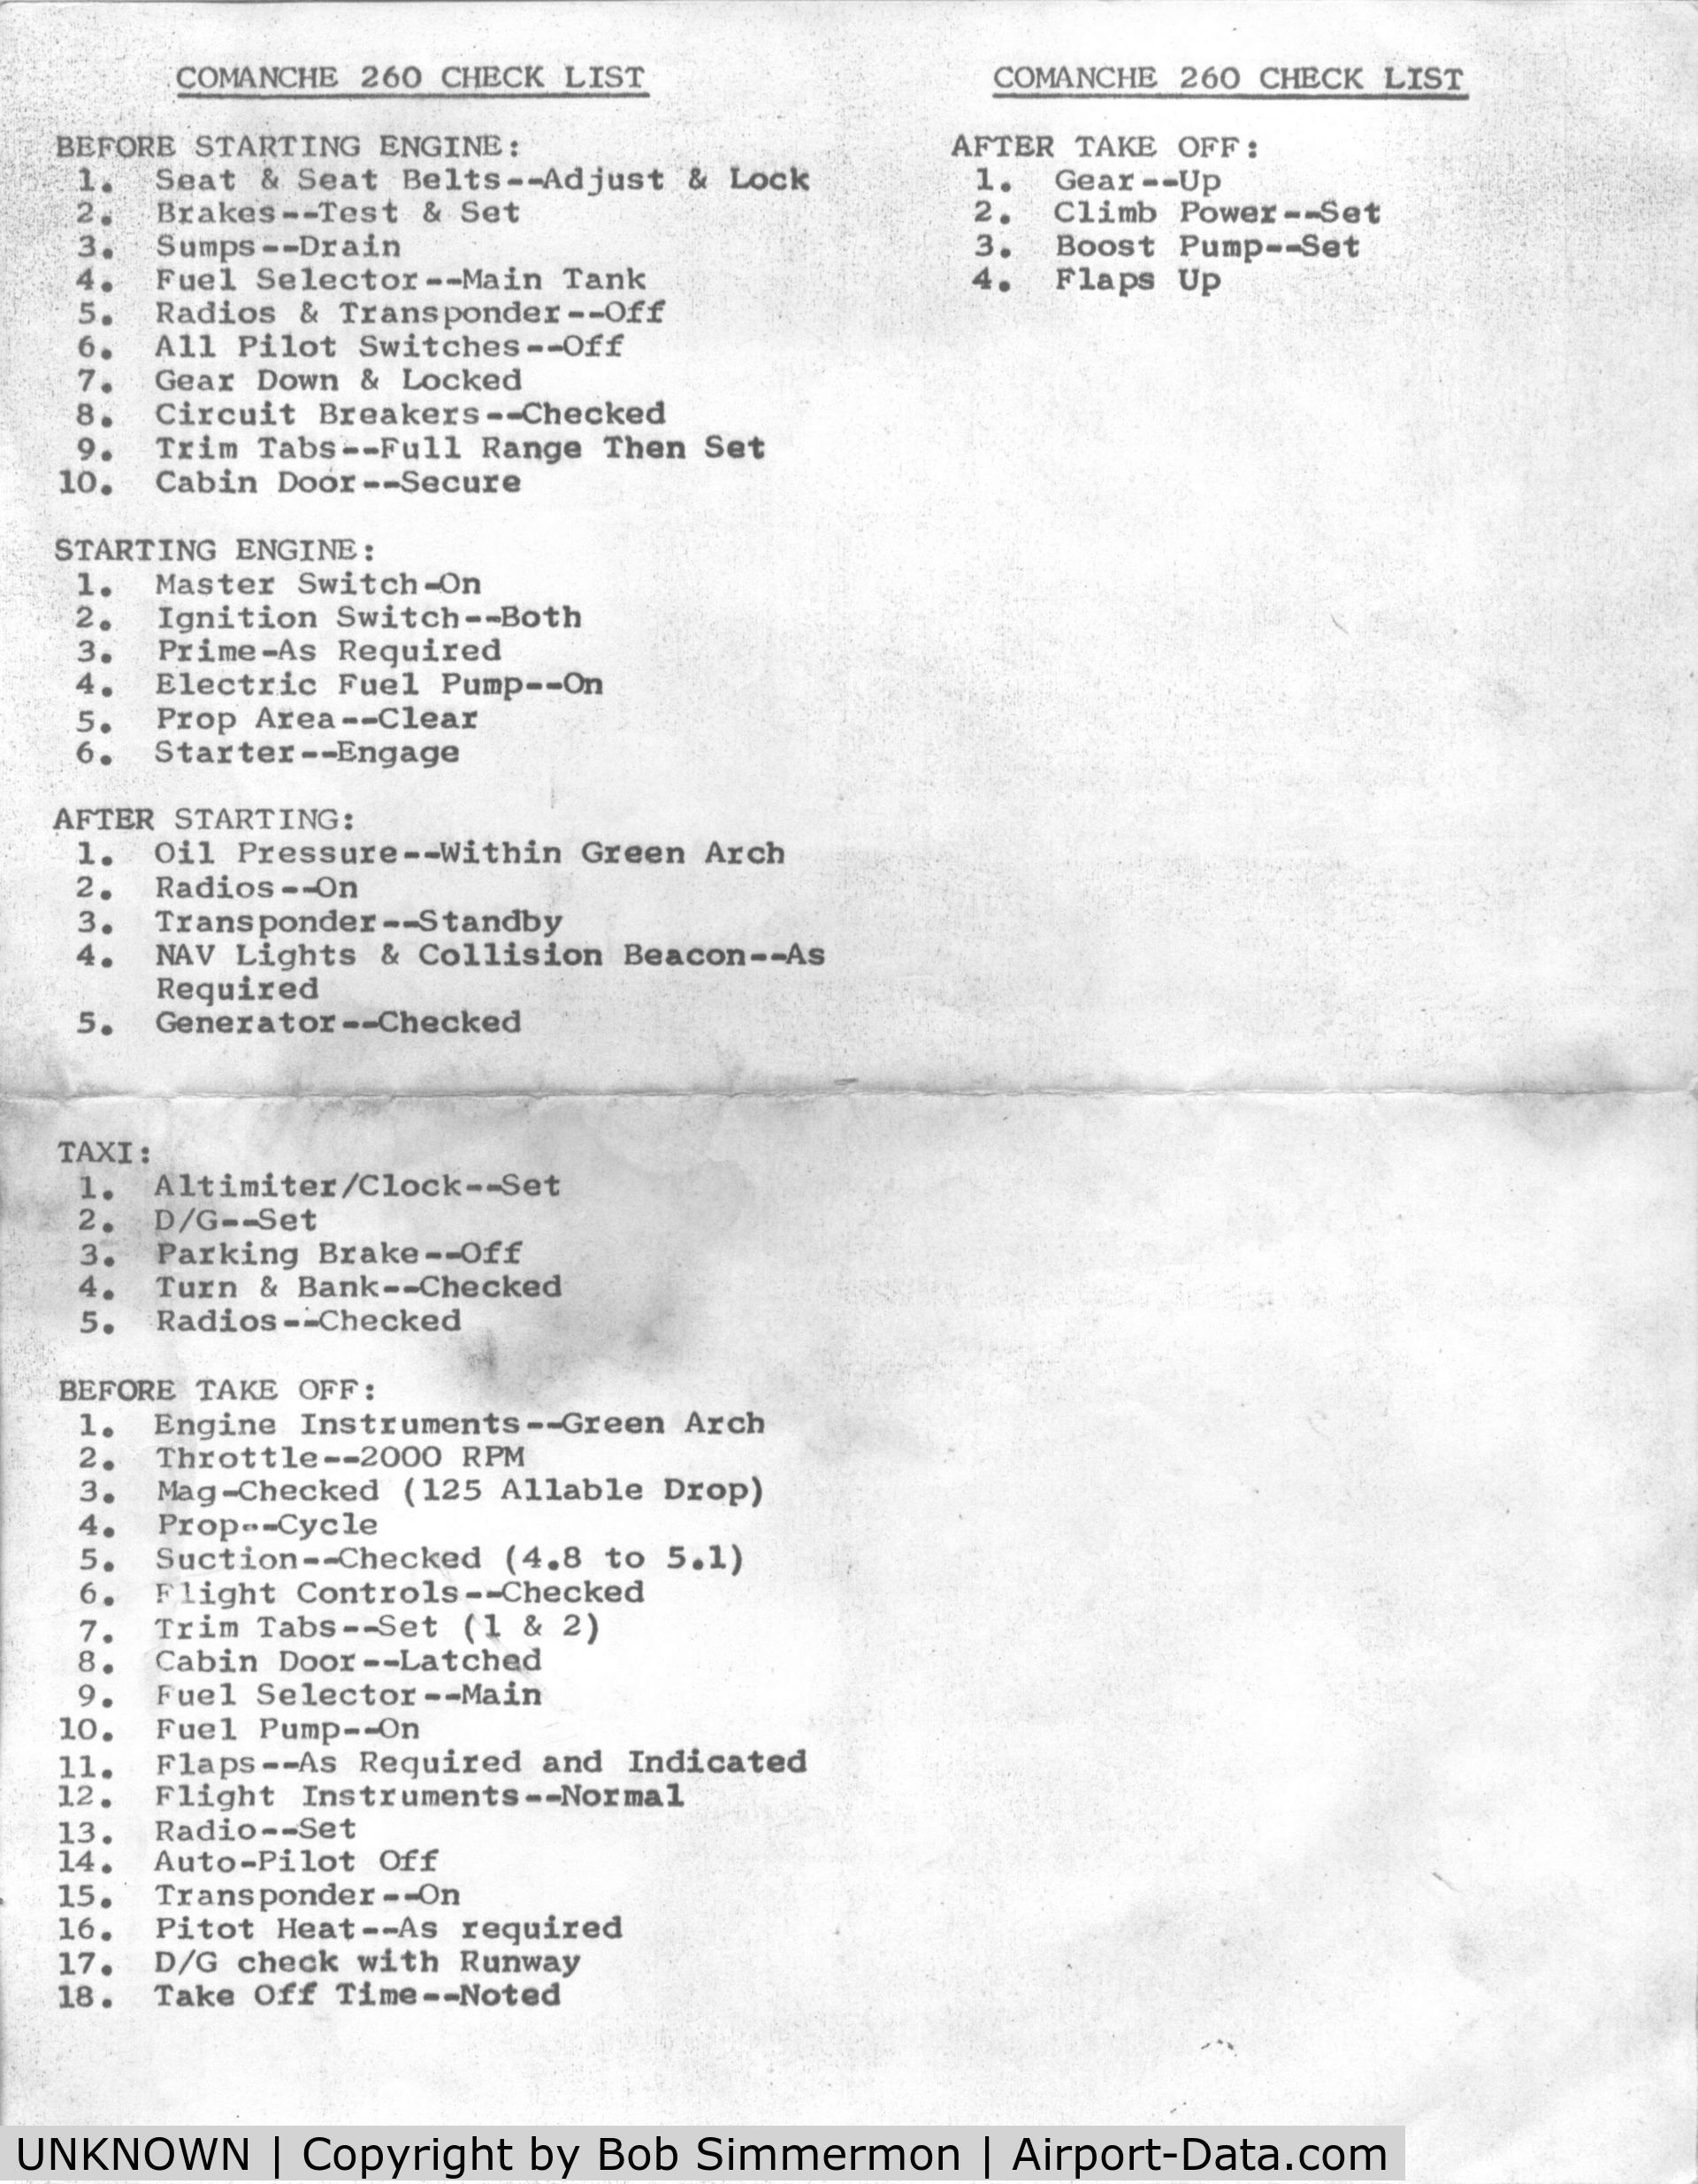 UNKNOWN, Miscellaneous Various C/N unknown, Checklist from Bob Dodge's mid-1906's Comanche 260